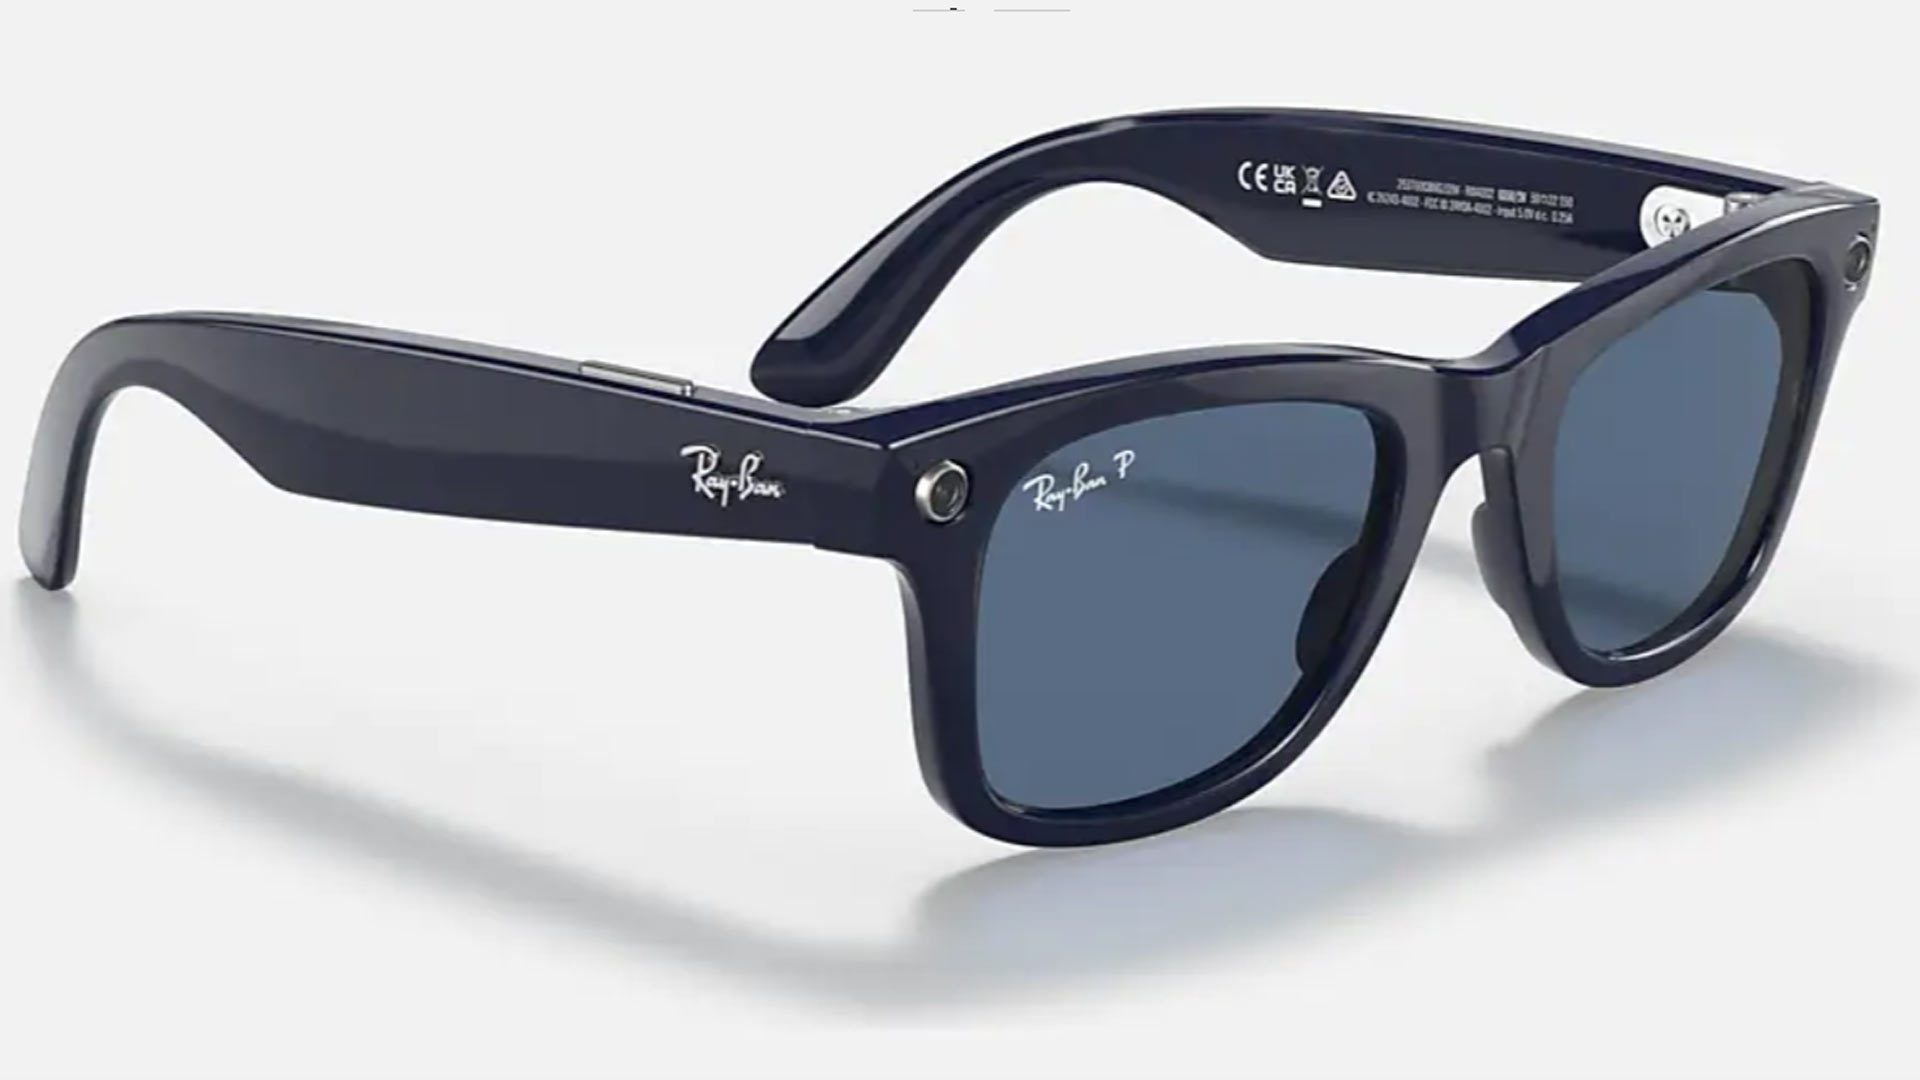 Ray-Bans Stories: Facebook's glasses aren't as scary as you think, yet